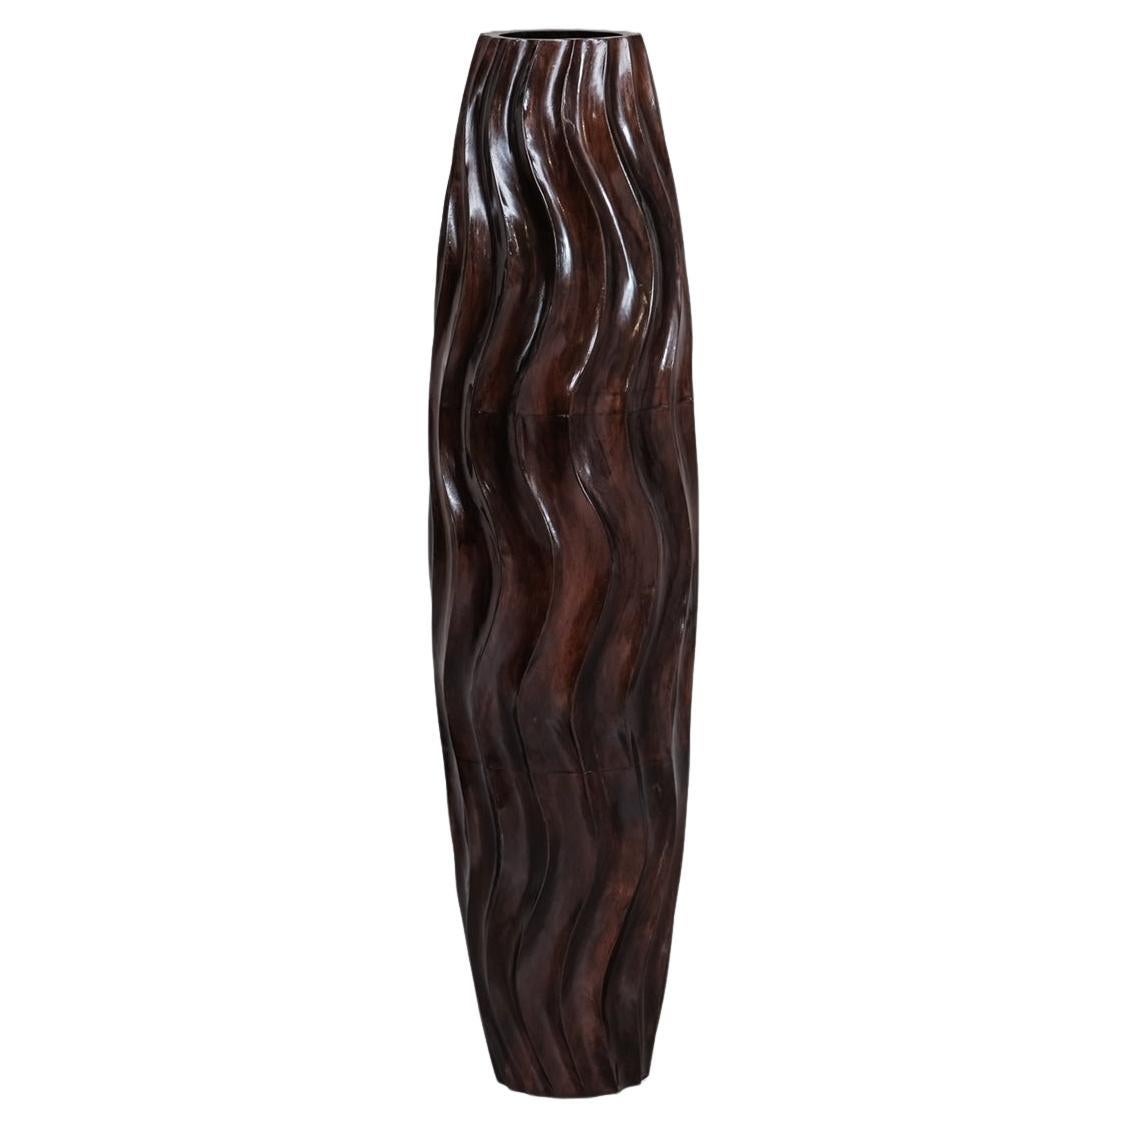 Wooden Tall French Mid-Century Decorative Vase